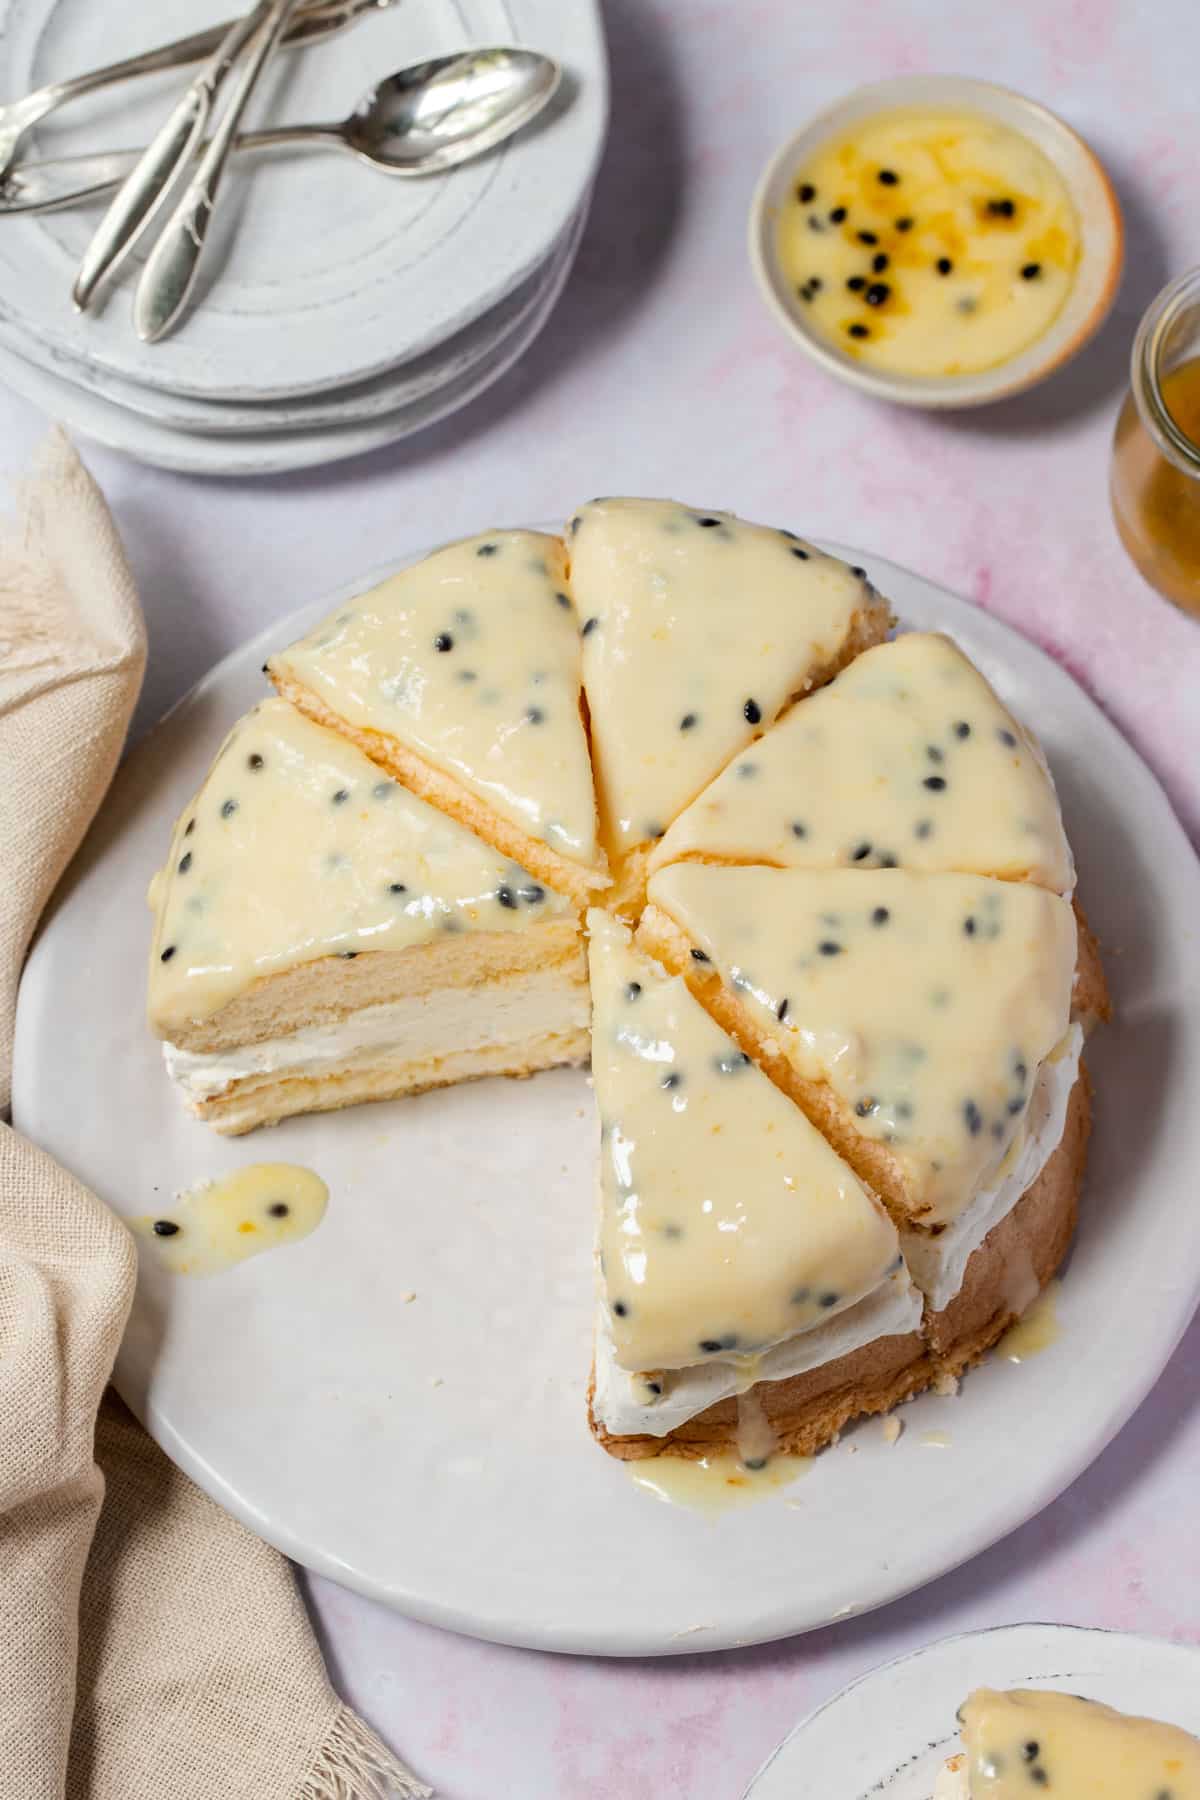 sponge cake cut into slices on a plate, topped with passionfruit icing.